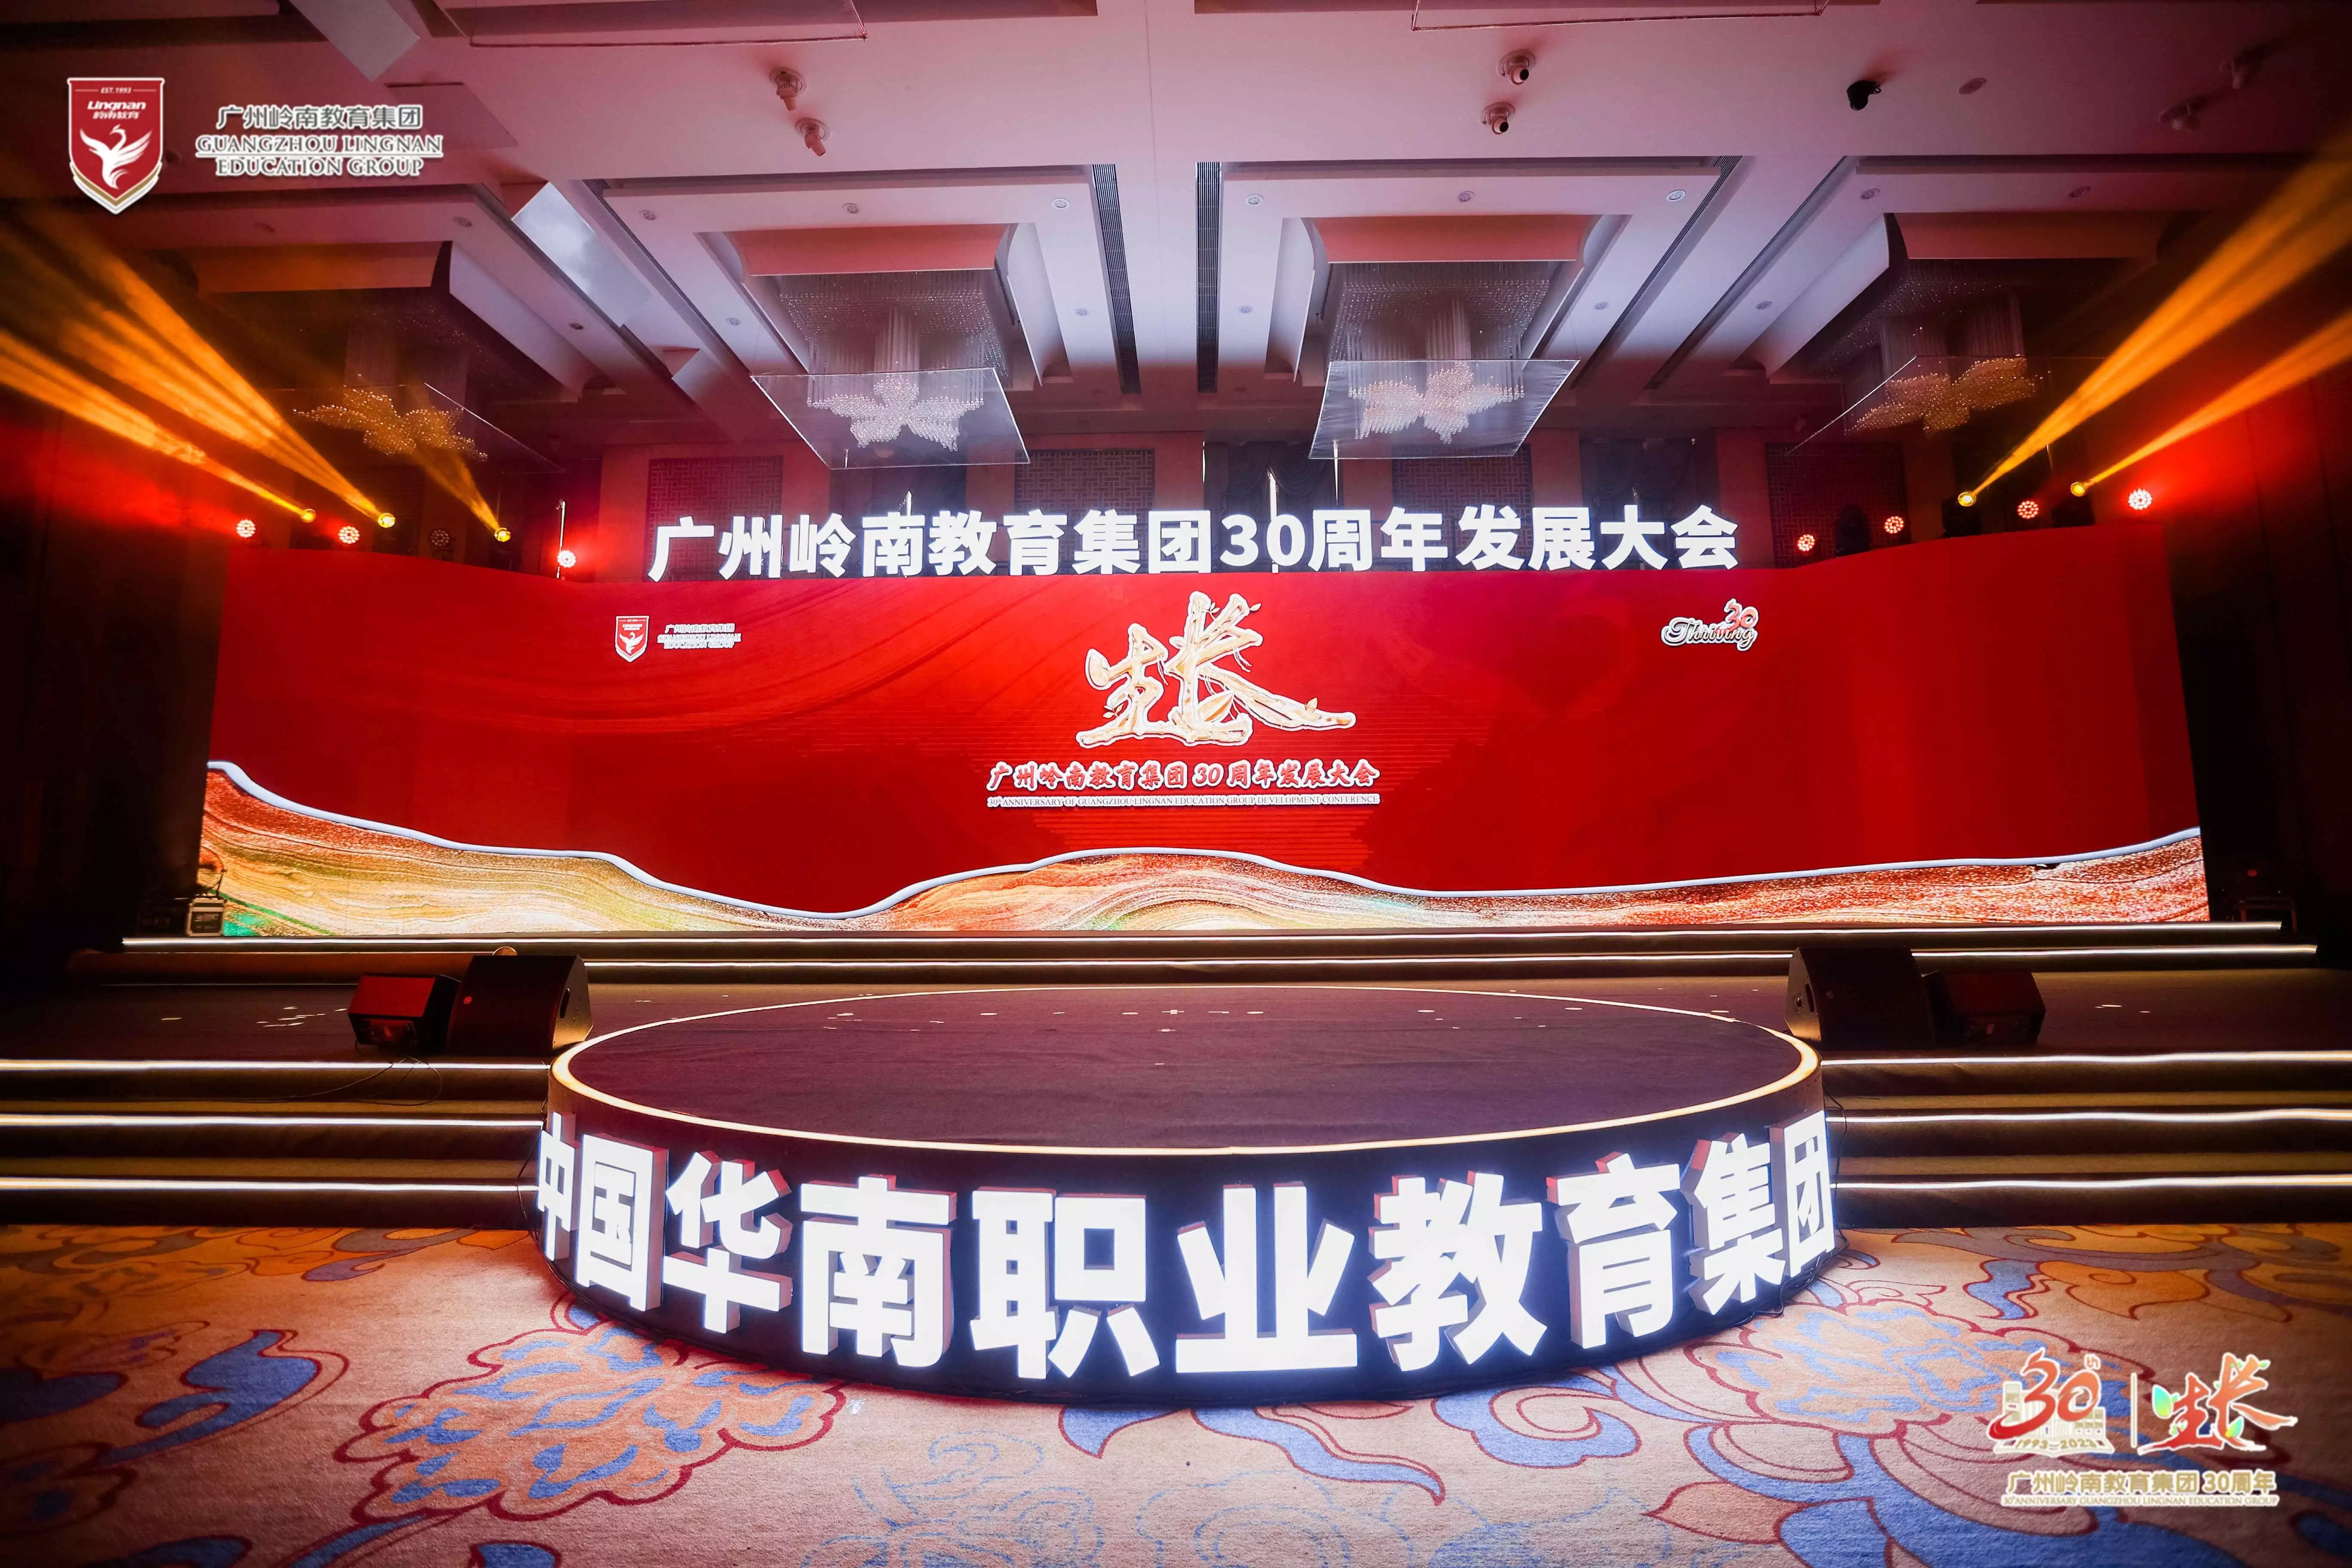 The integration of production and education deepen the new chapter of the new chapter of Lingnan Education's 30th anniversary of the results of fruitful broadcast articles